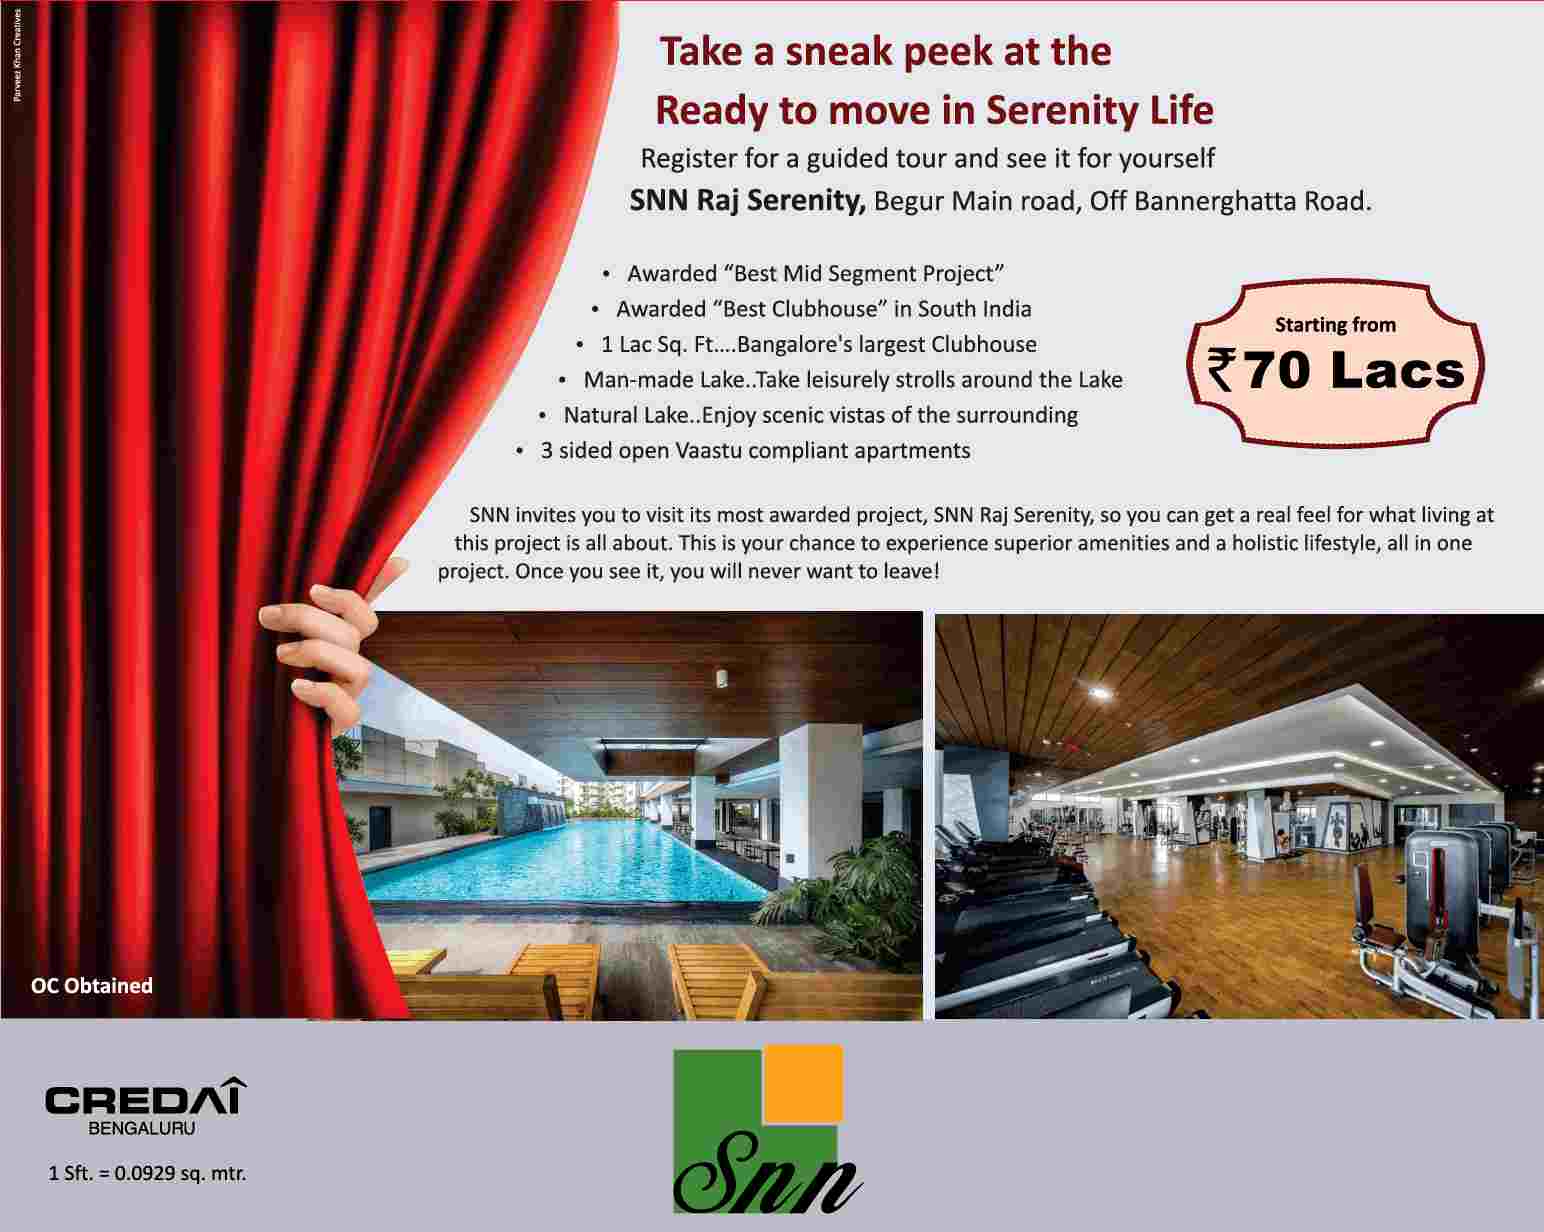 Experience superior amenities and a holistic lifestyle at SNN Raj Serenity in Bangalore